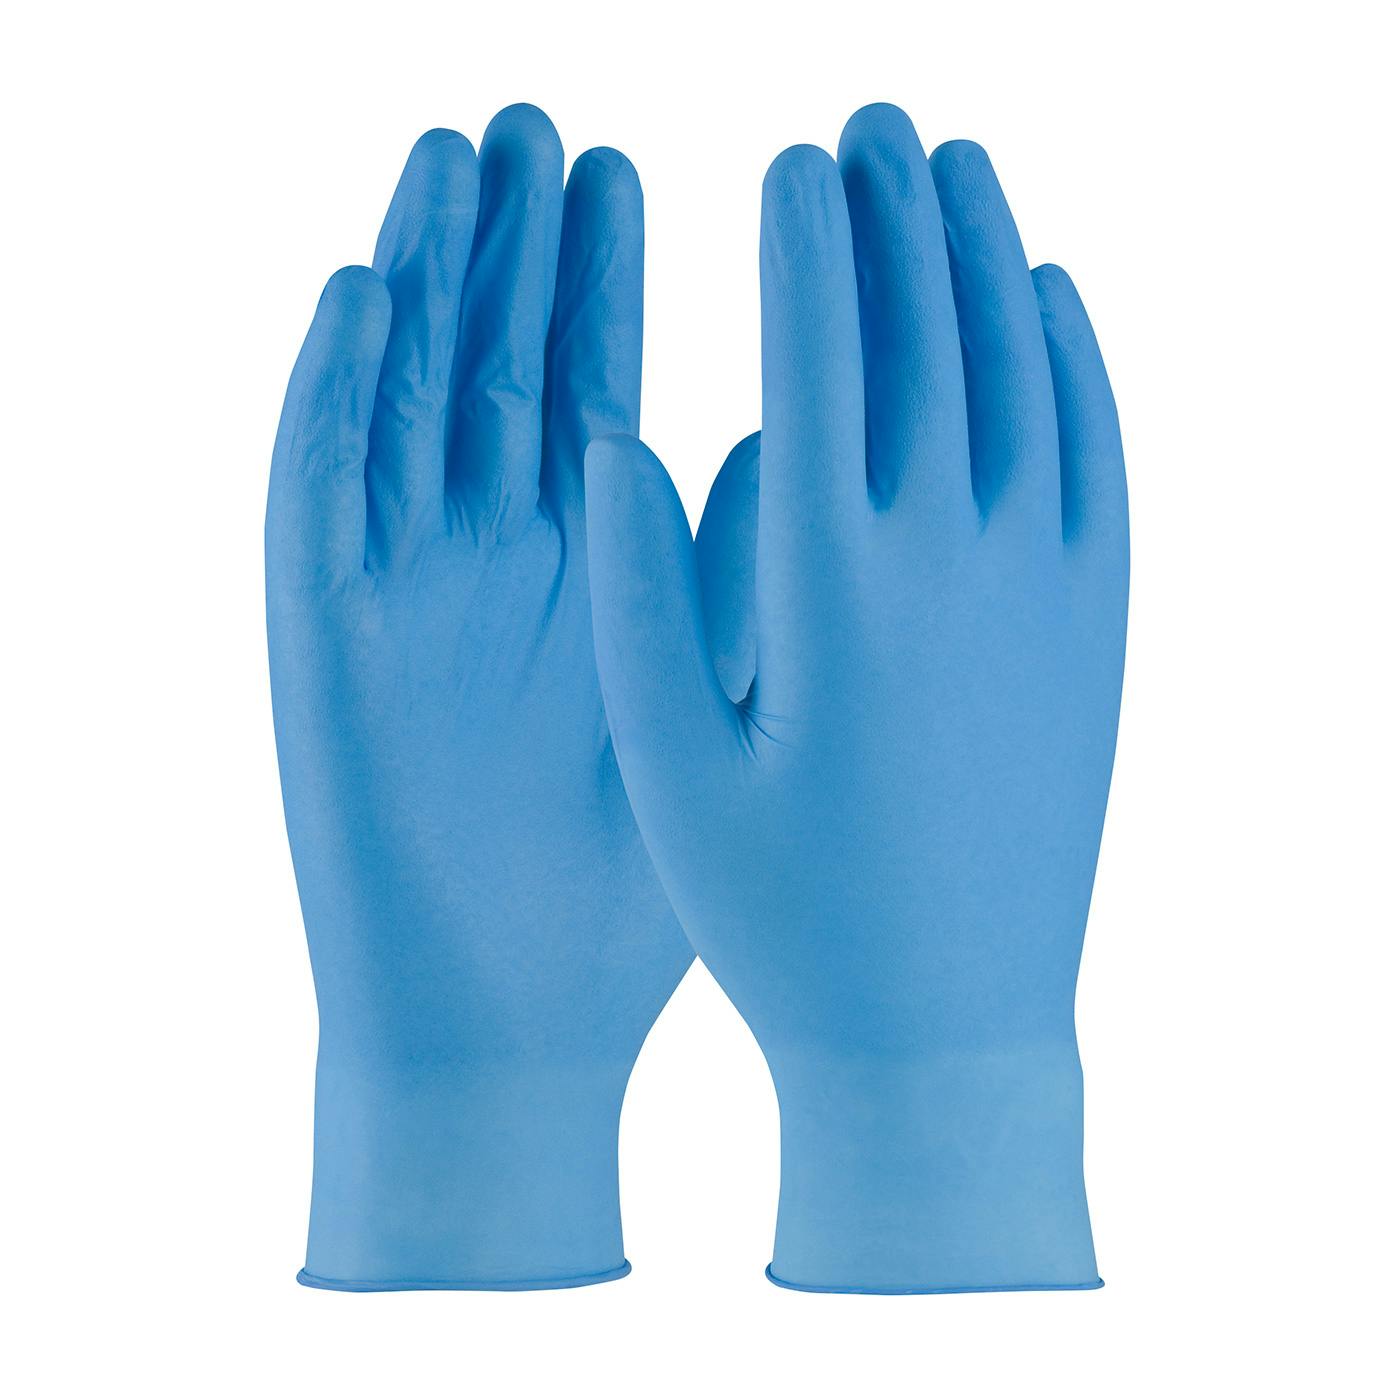 Ambi-dex® Axle Disposable Nitrile Glove, Powder Free with Textured Grip - 4 mil (63-532PF)_1